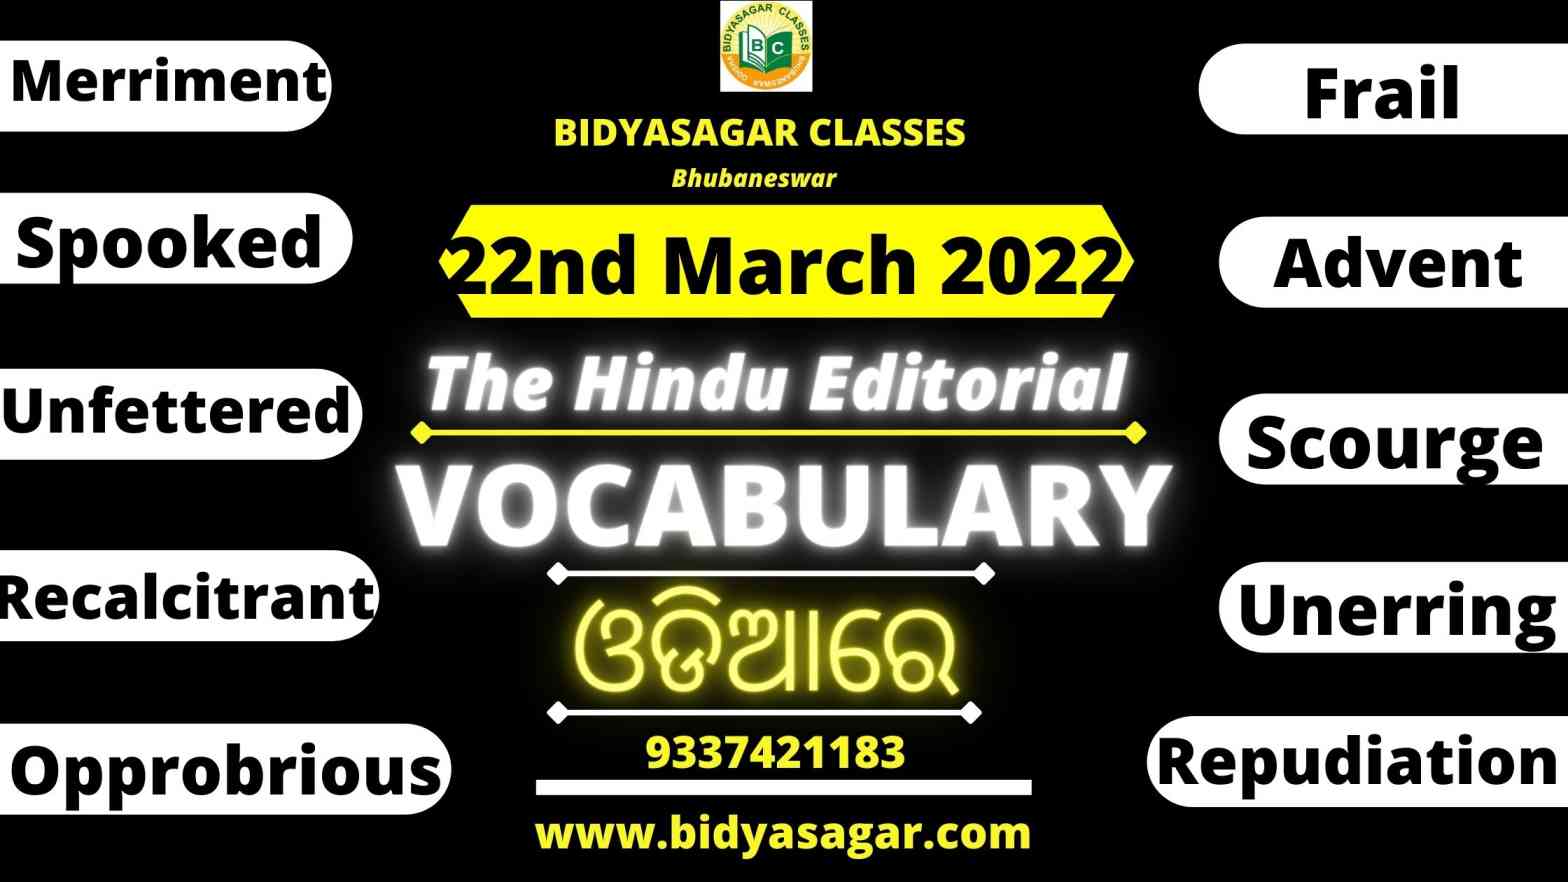 The Hindu Editorial Vocabulary of 22nd March 2022